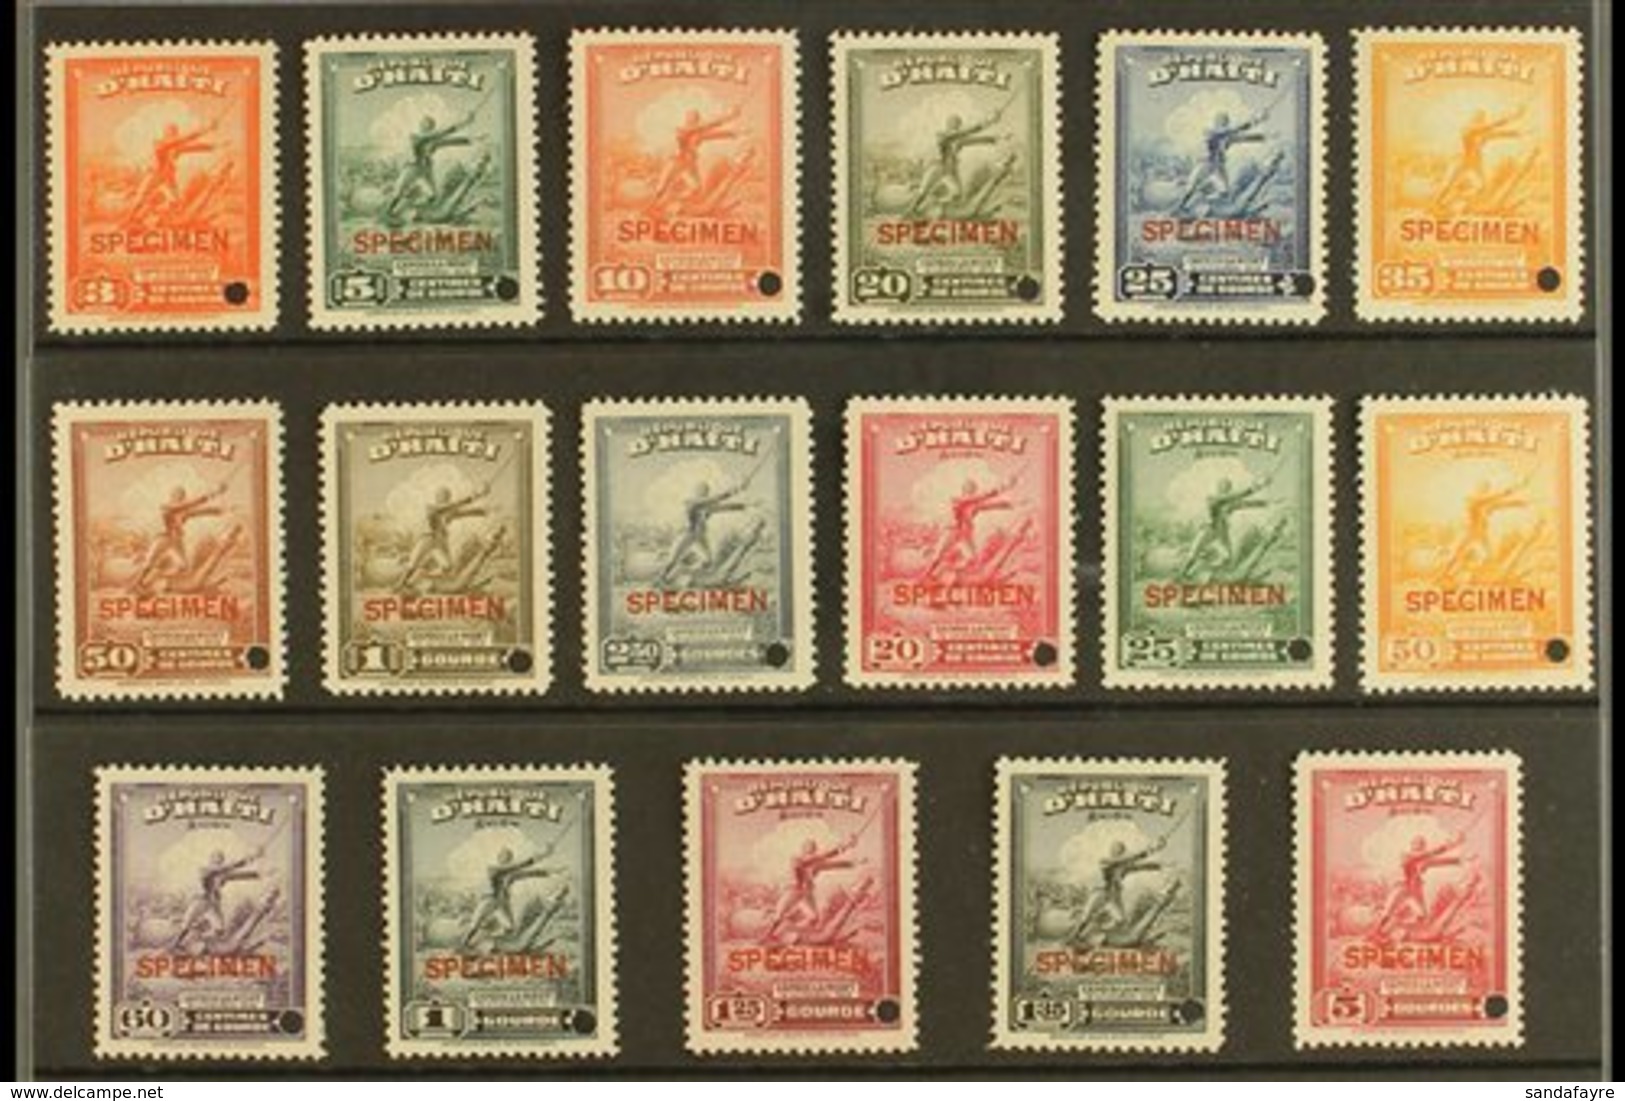 1946  "Capois-la-Mort" Postage And Air Complete Set, SG 400/16, Overprinted "SPECIMEN" And With Security Punch Hole, Nev - Haiti